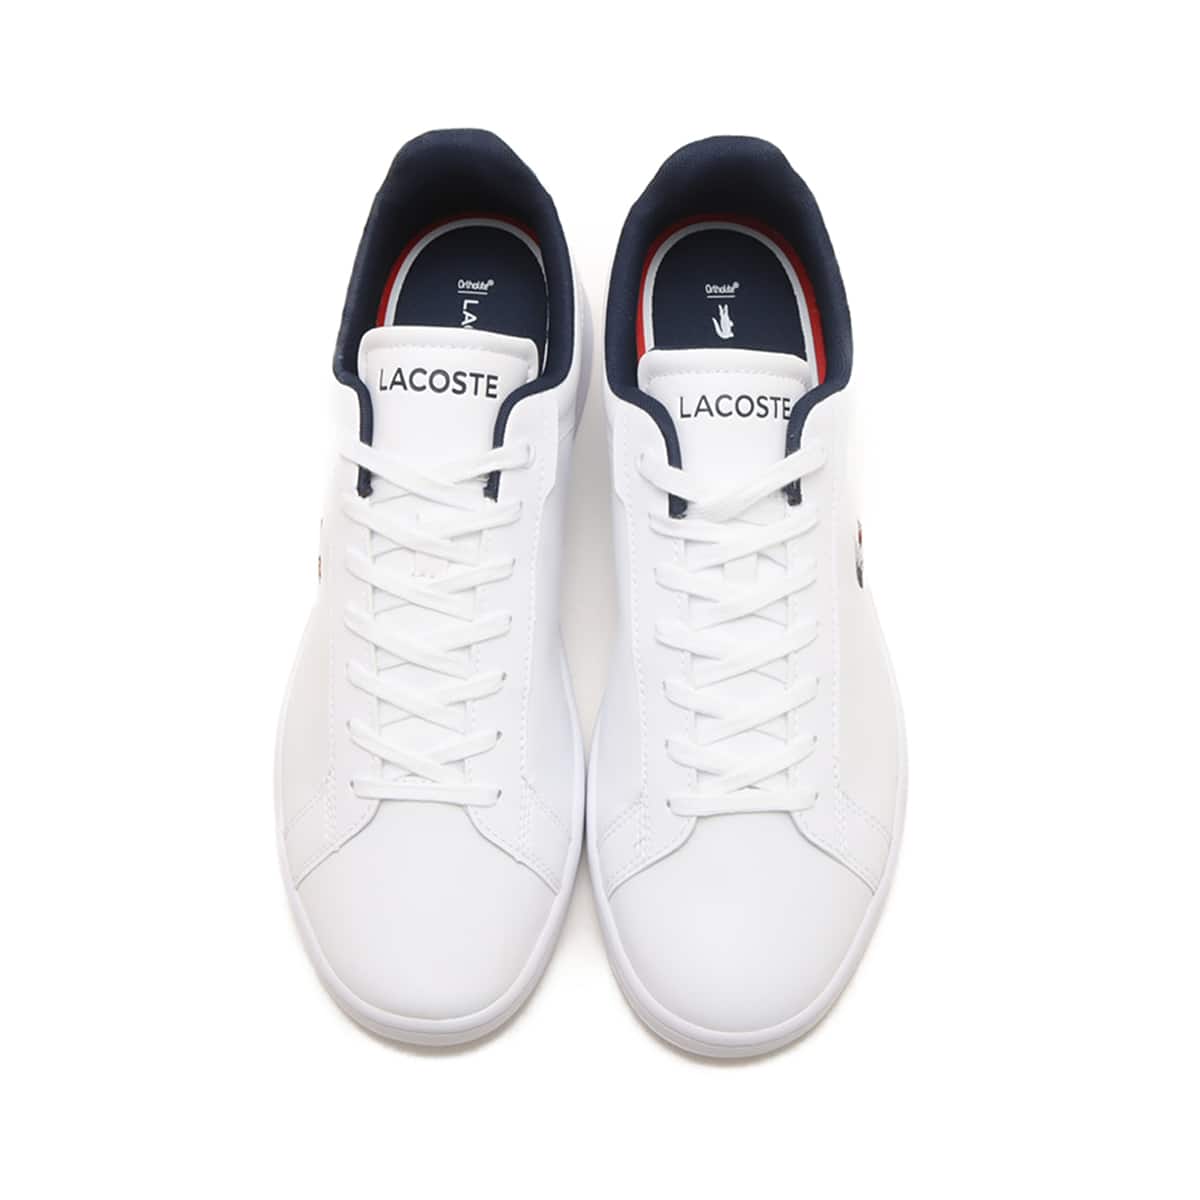 LACOSTE CARNABY PRO TRI 123 1 SMA WHT/NVY/RED 23FA-I